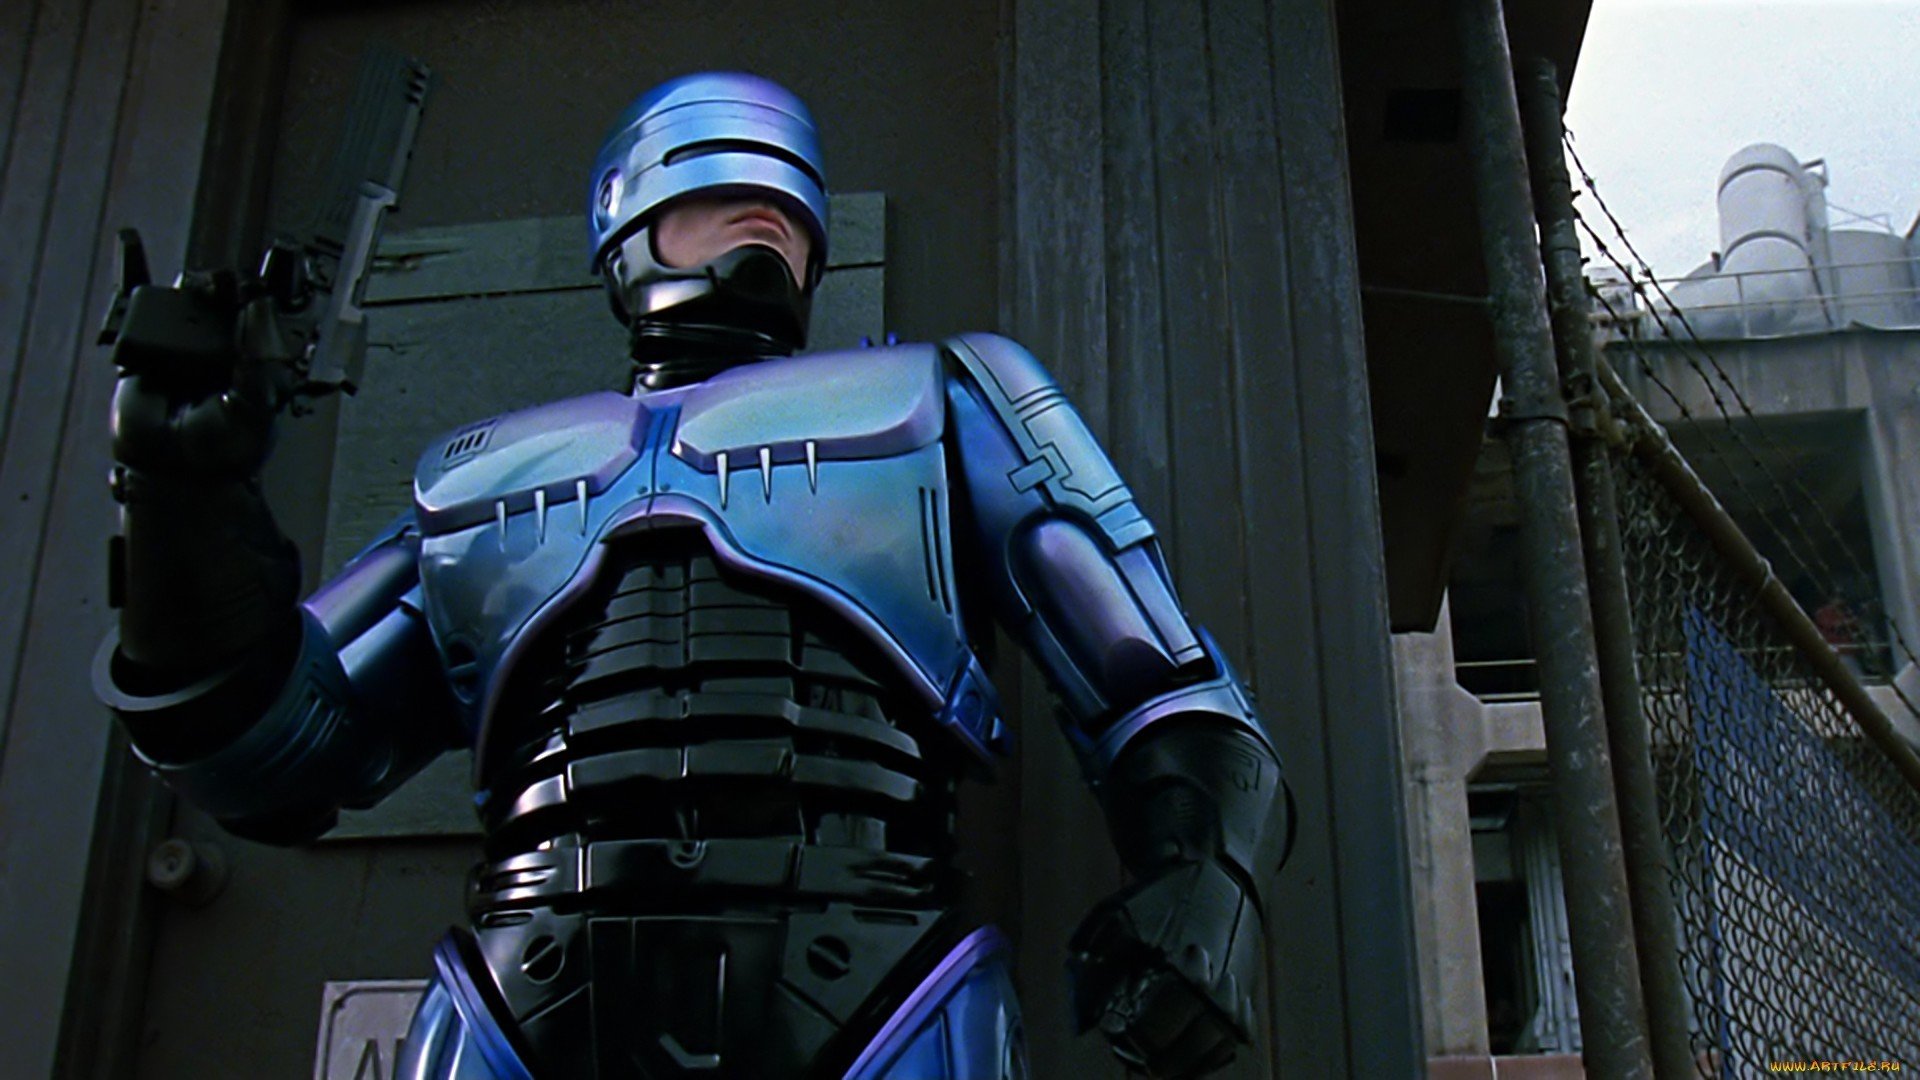 Download 1080p RoboCop (1987) PC wallpaper ID:497835 for free